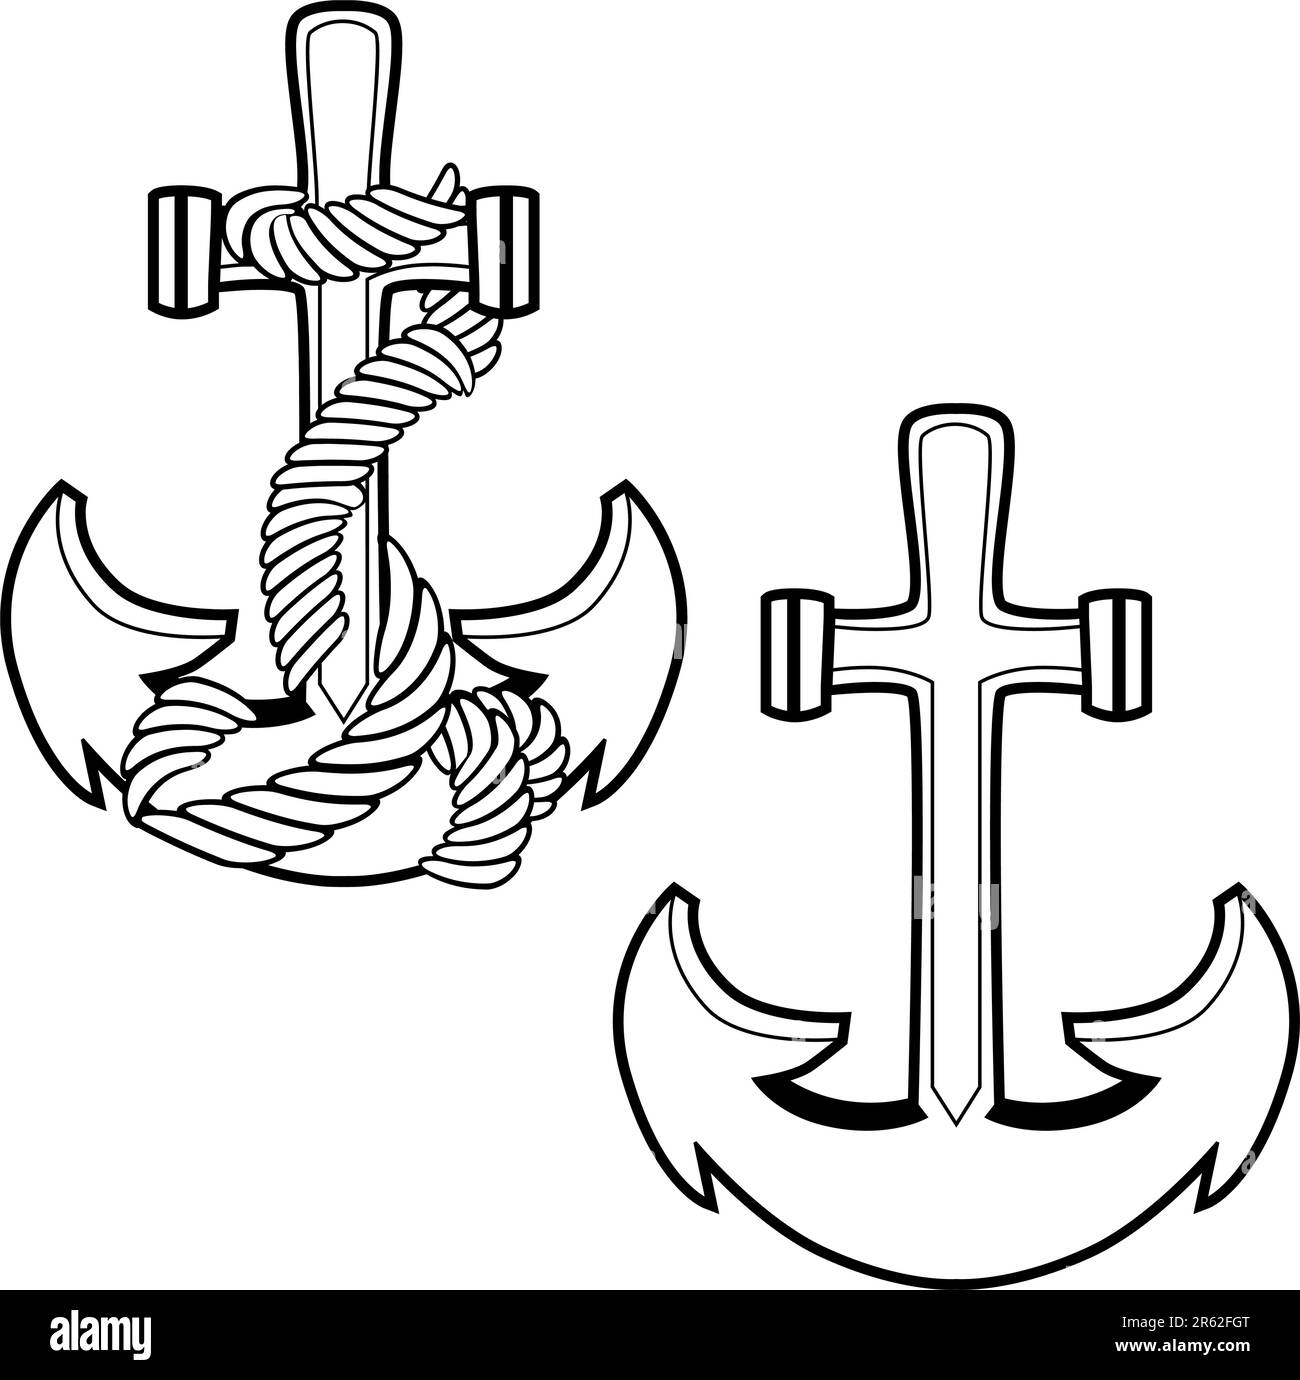 Anchor isolated on a white background. Stock Vector